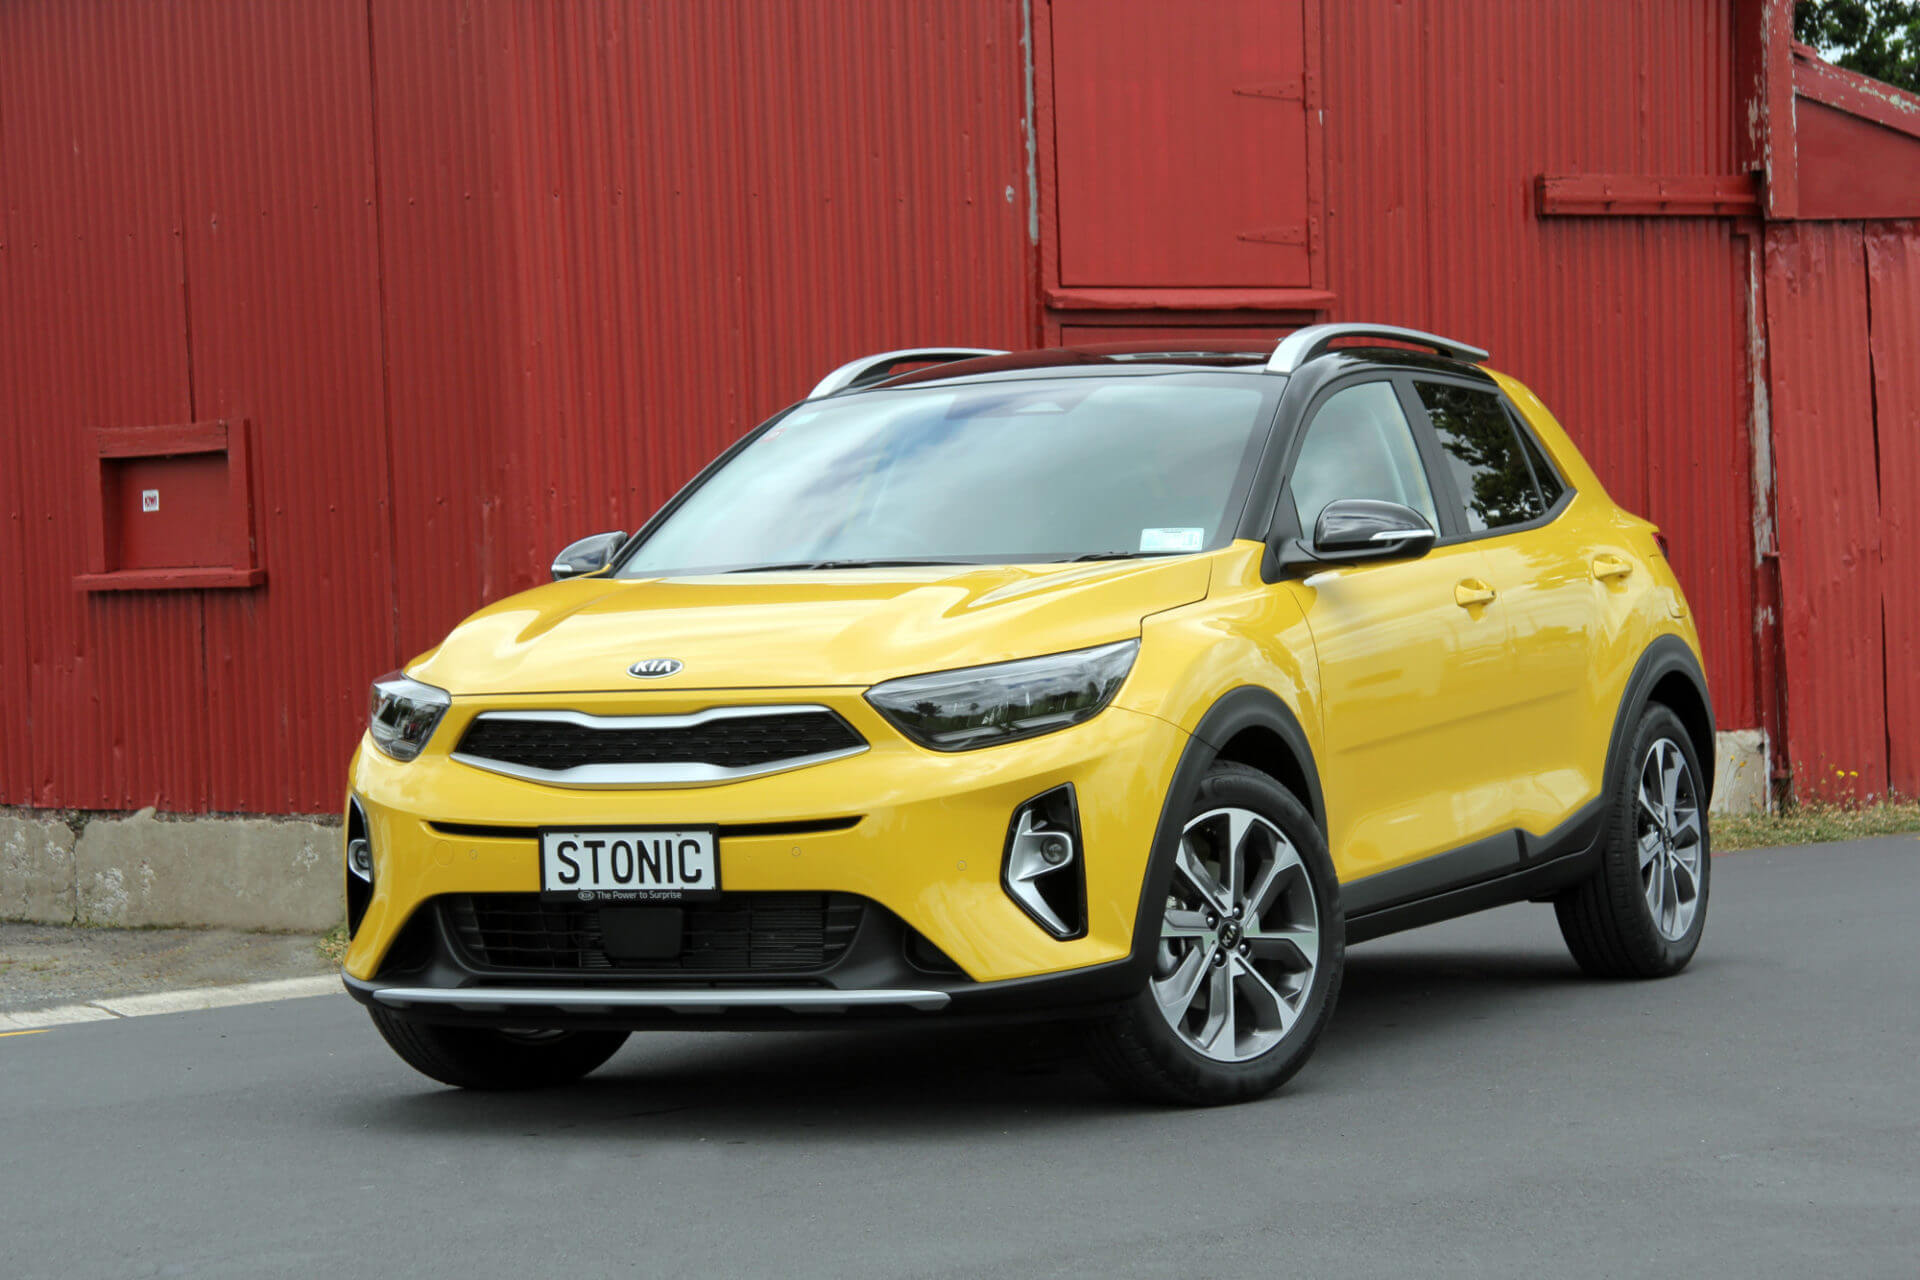 Kia Stonic their new small SUV available now DriveLife